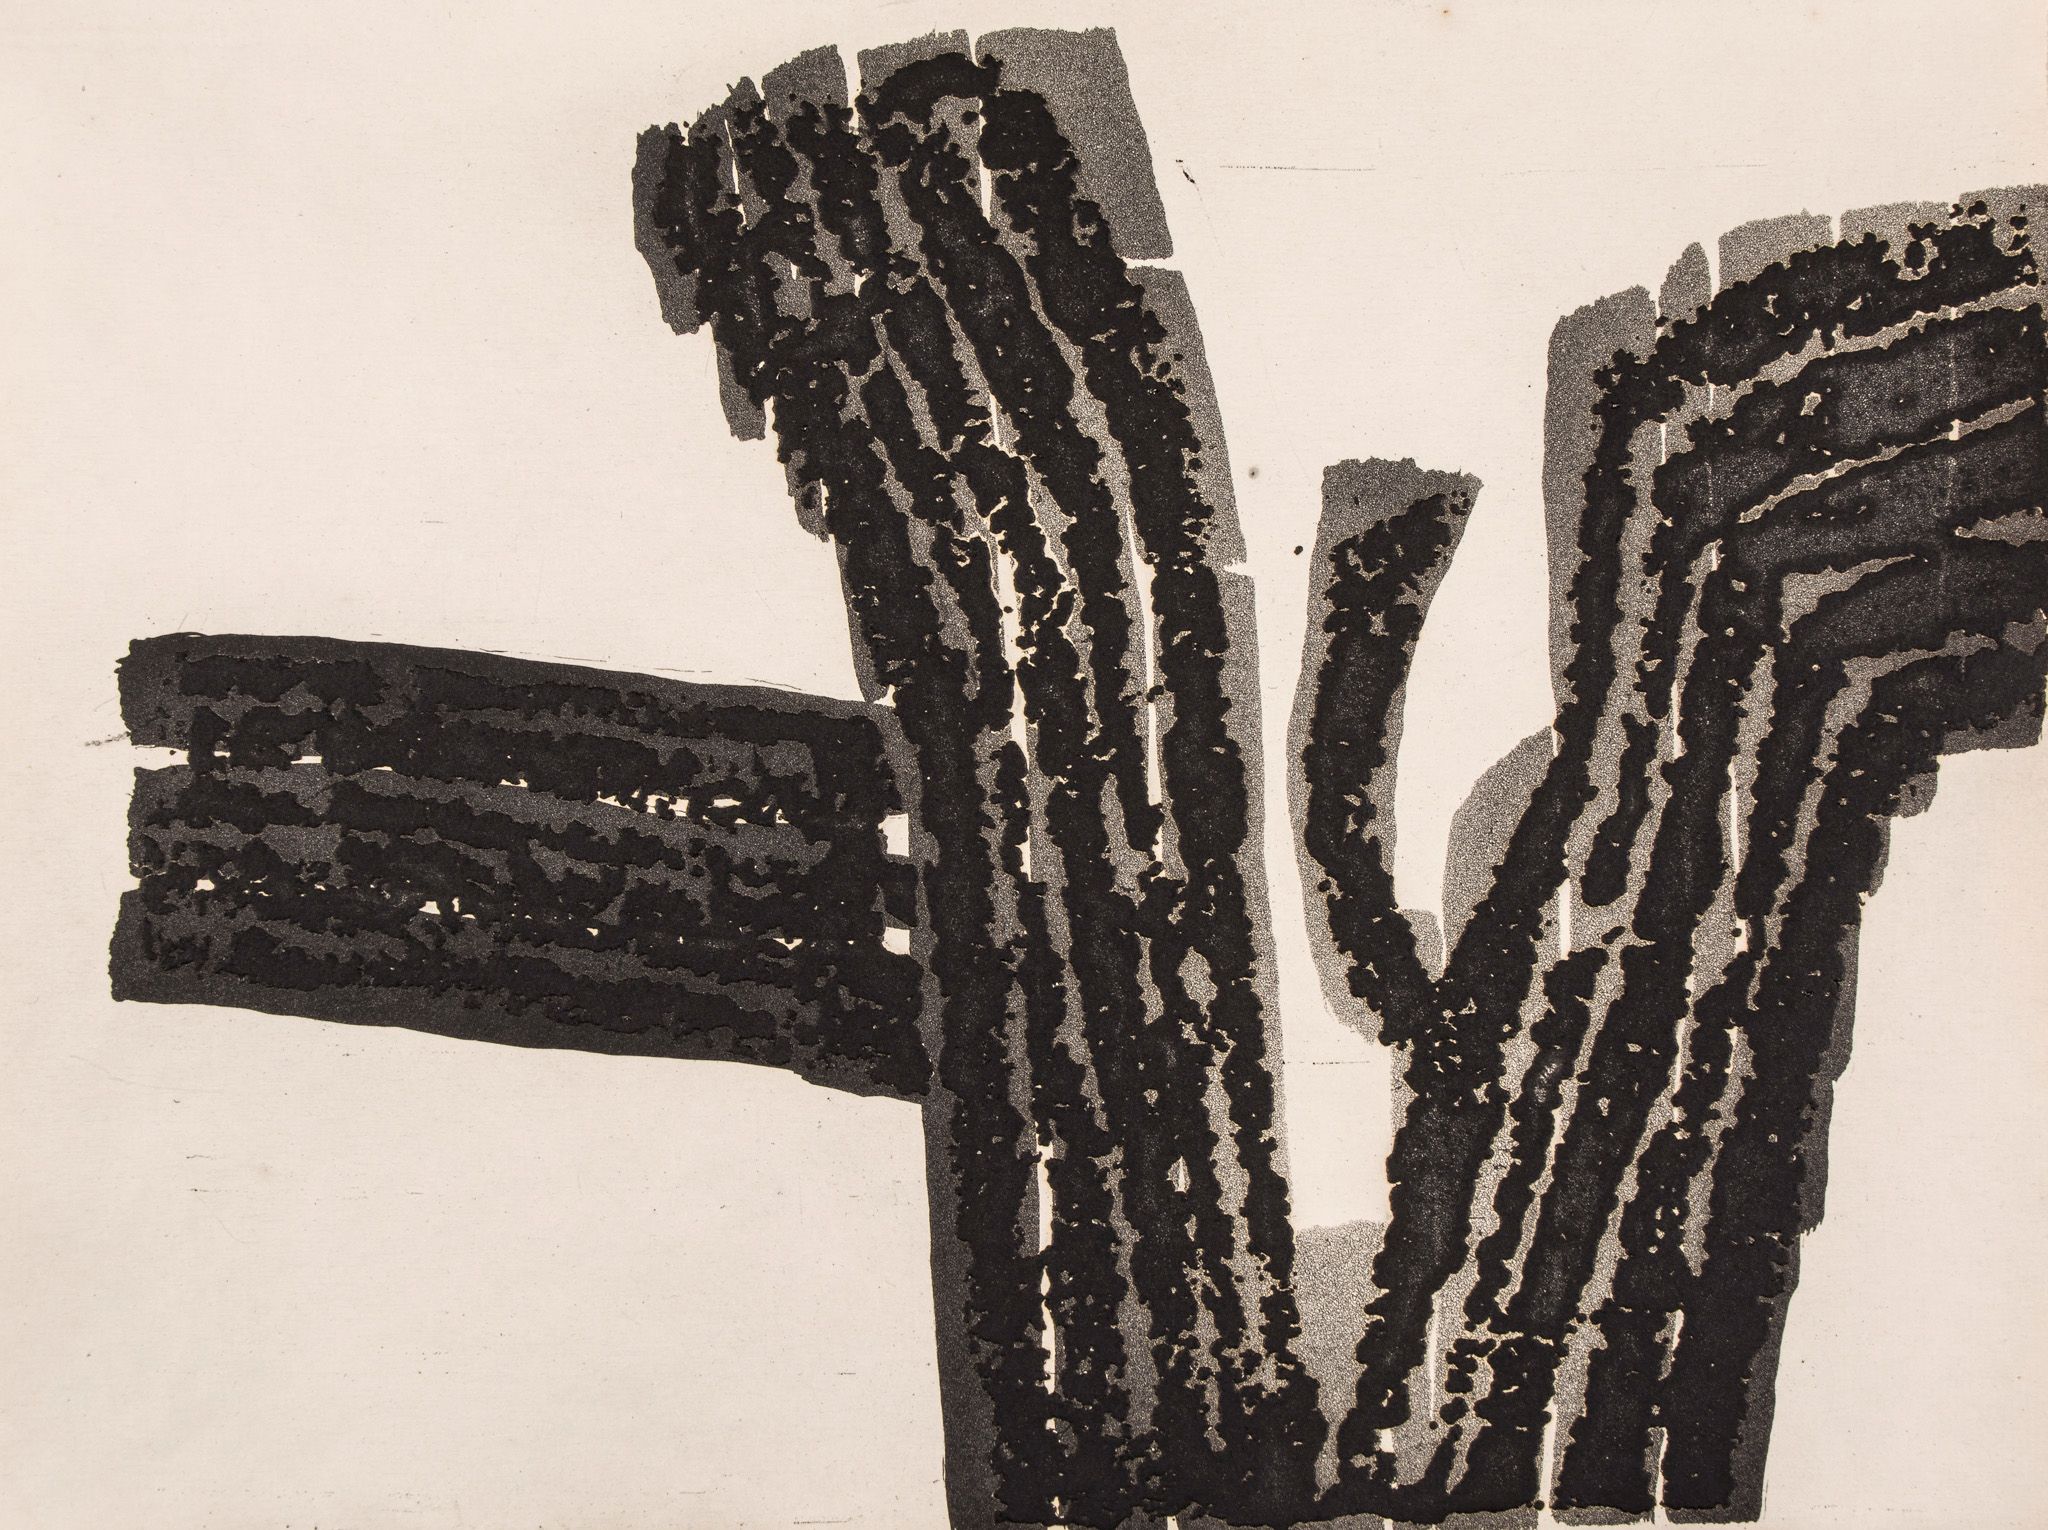 Raoul Ubac (1910-1985) Vieux Pays the incomplete portfolio, 1967, comprising thirteen etchings